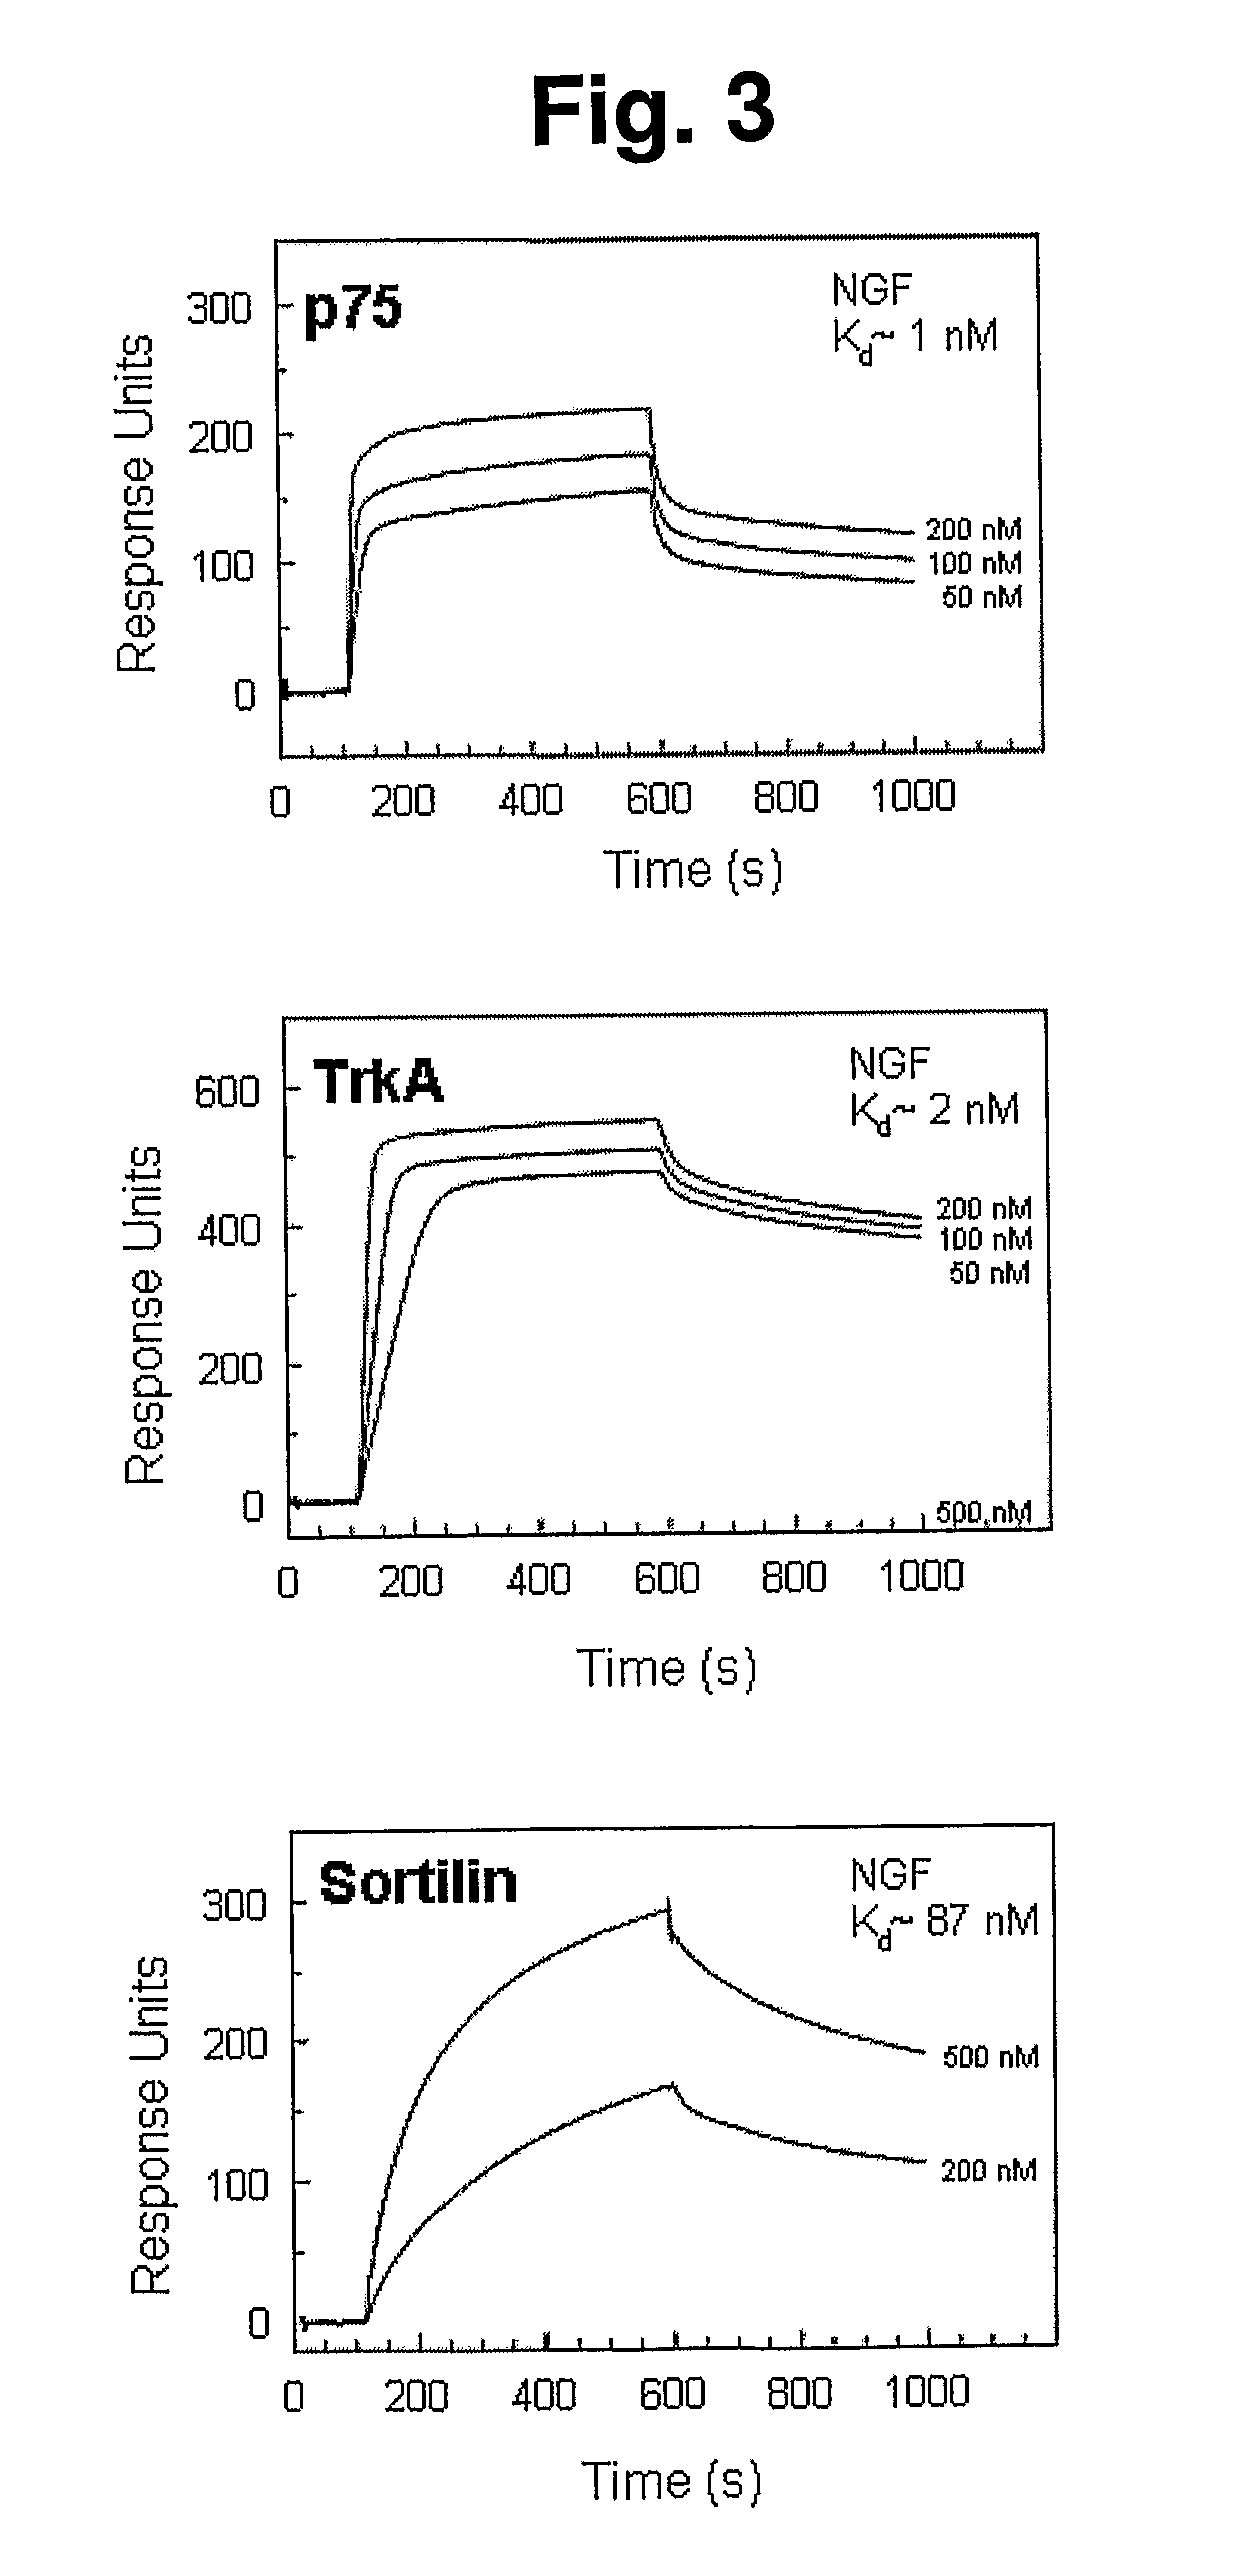 Modulation of activity of proneurotrophins